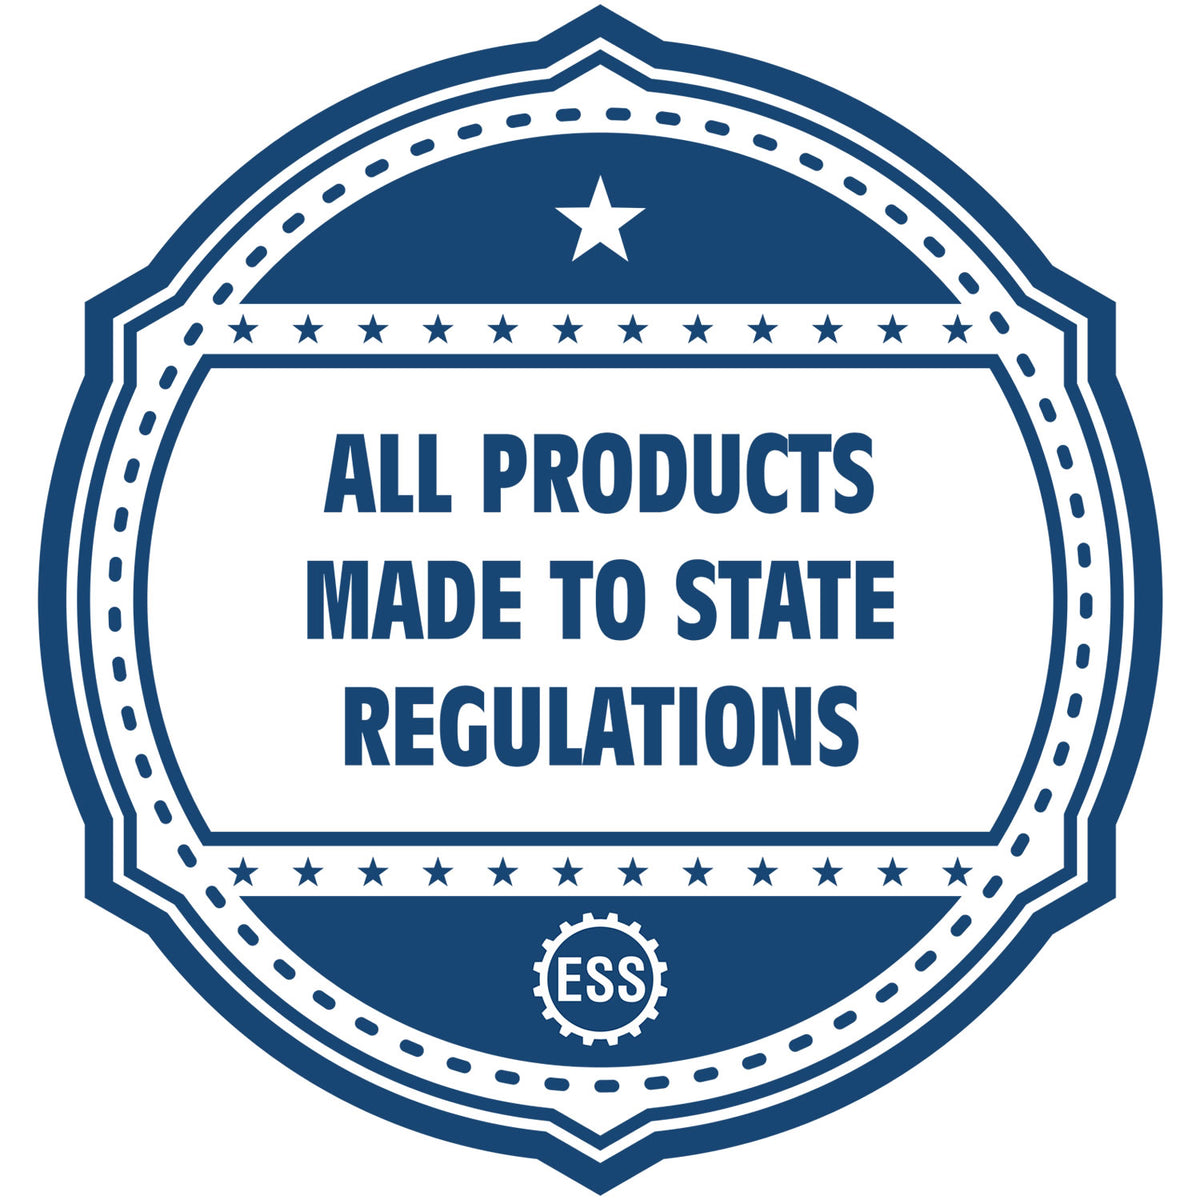 An icon or badge element for the Handheld Ohio Professional Engineer Embosser showing that this product is made in compliance with state regulations.